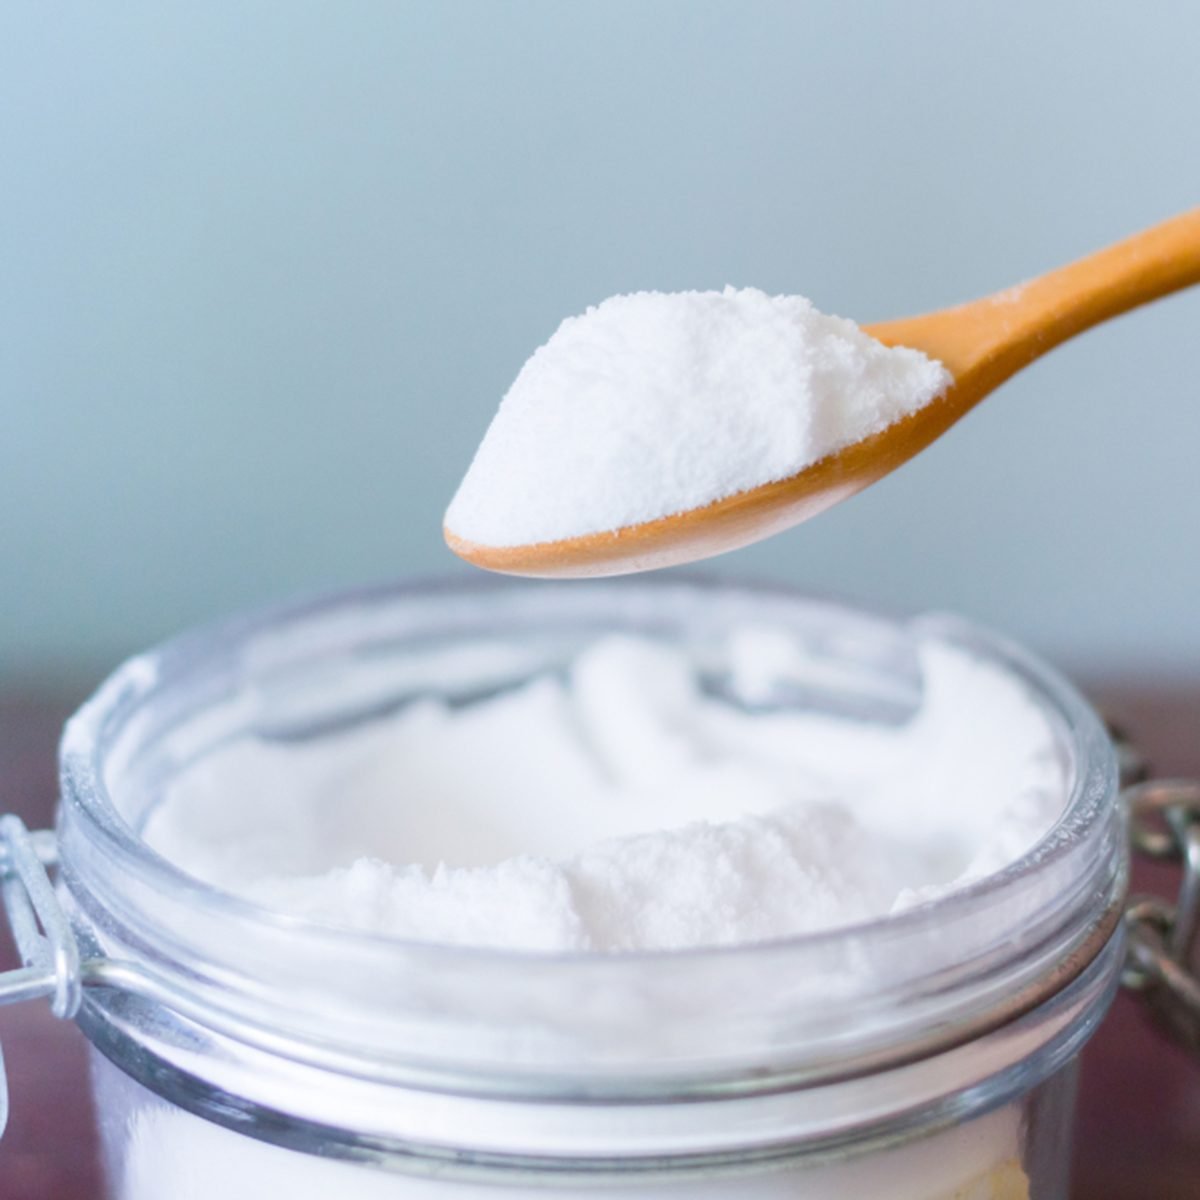 12 Surprising Benefits of Baking Soda for Health and Beauty